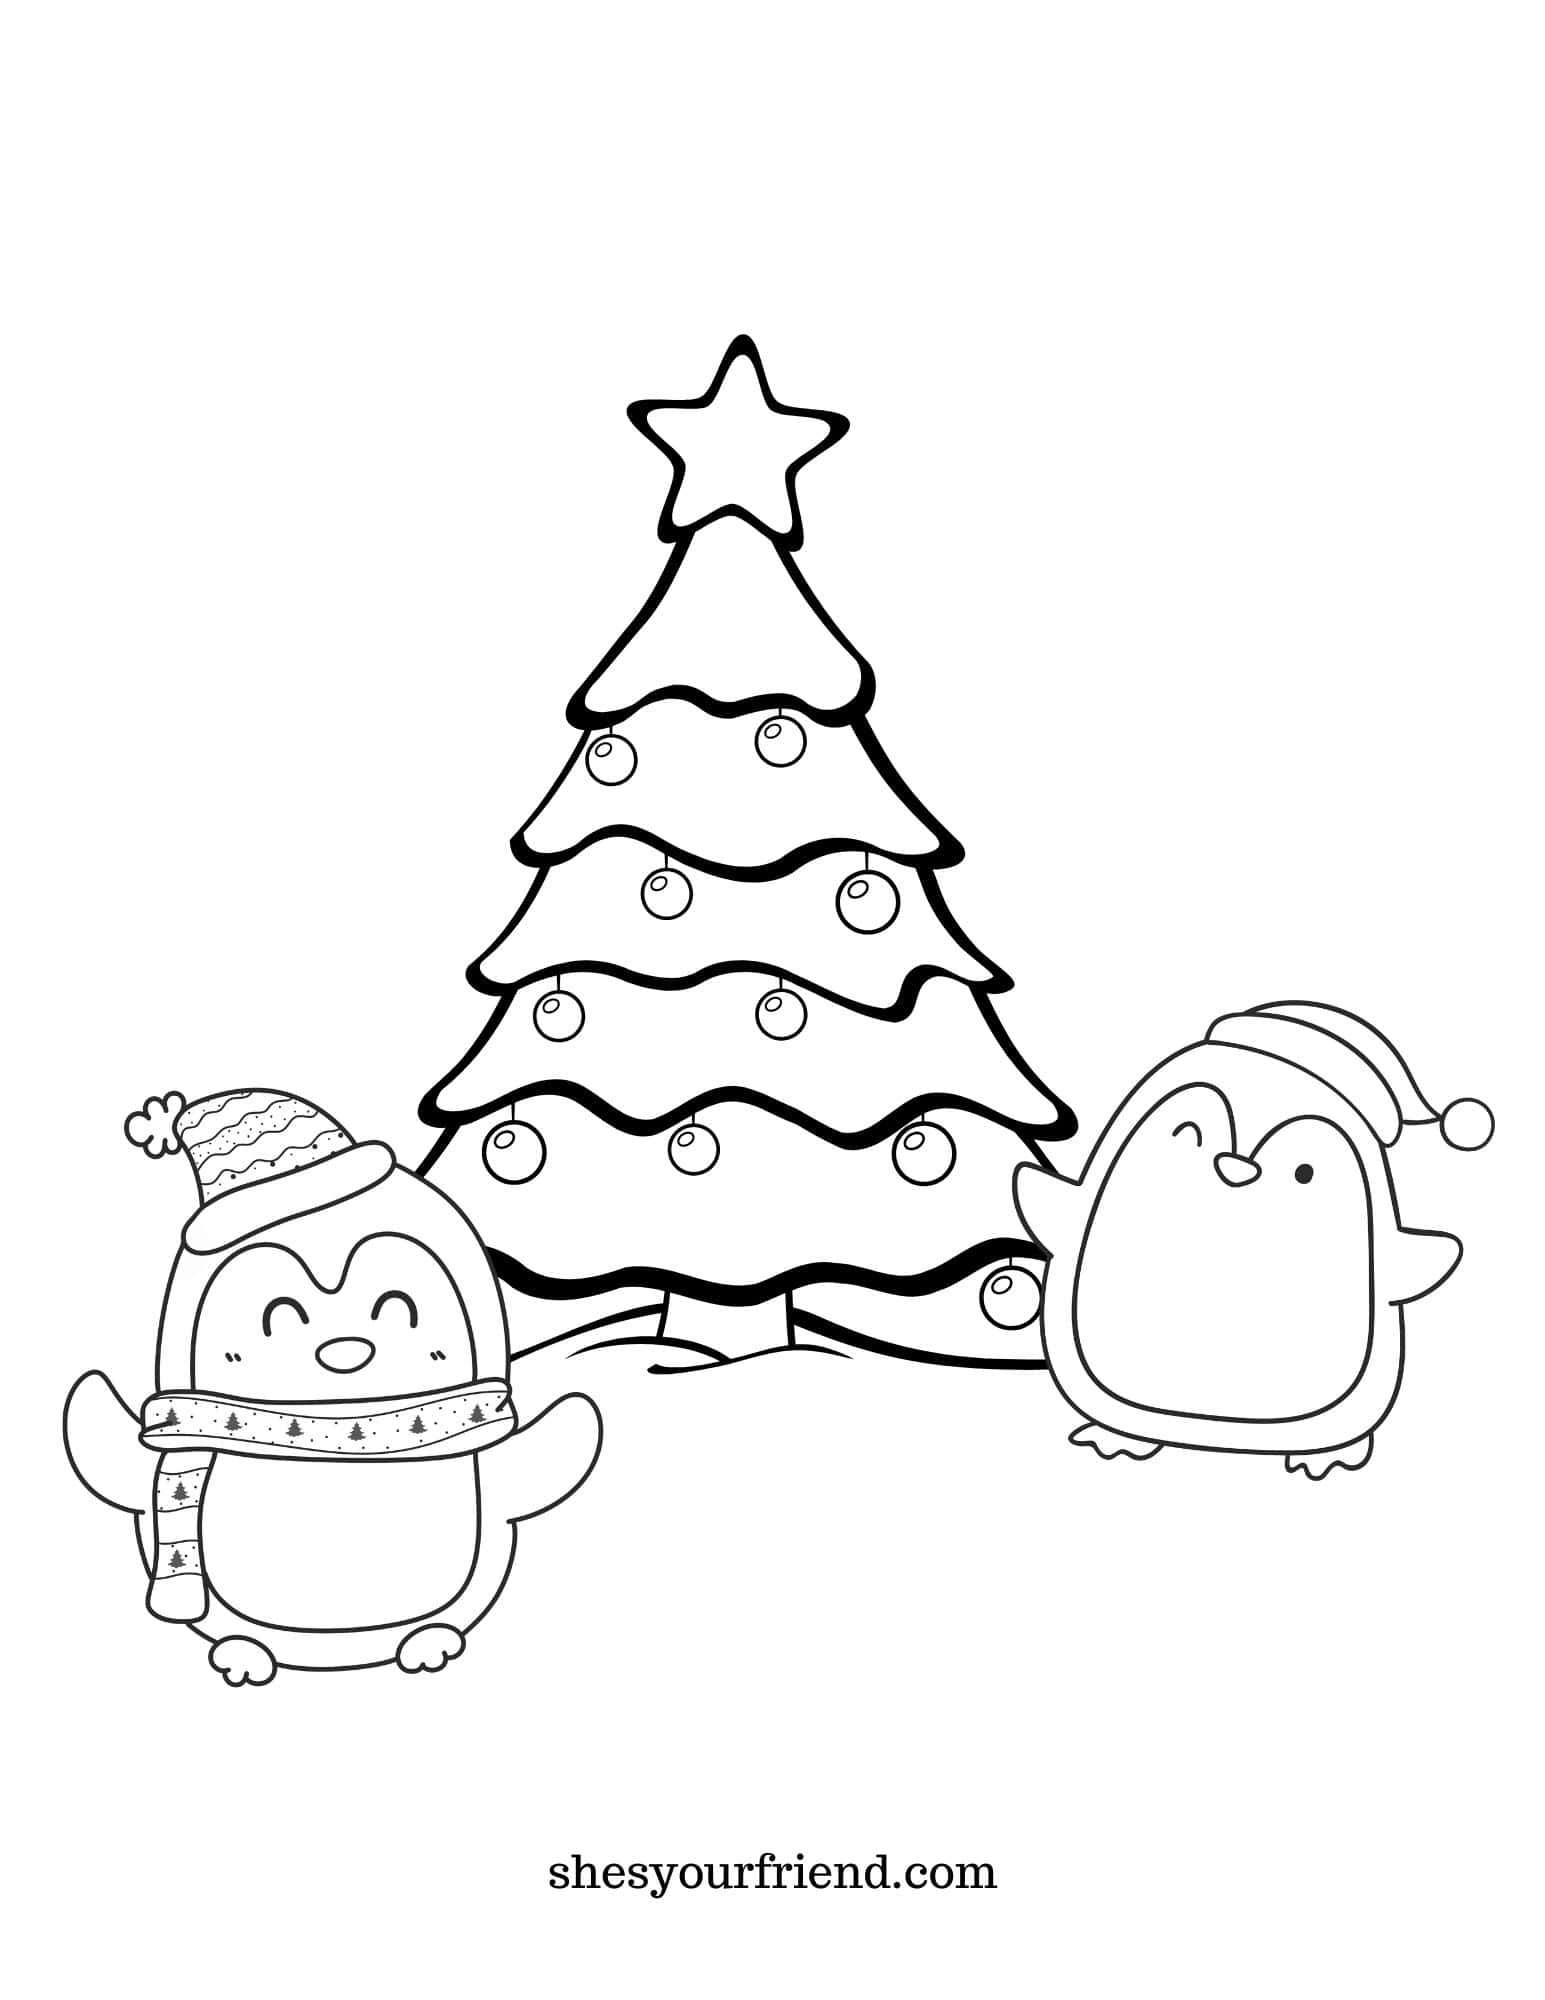 a coloring page with two penguins by a christmas tree